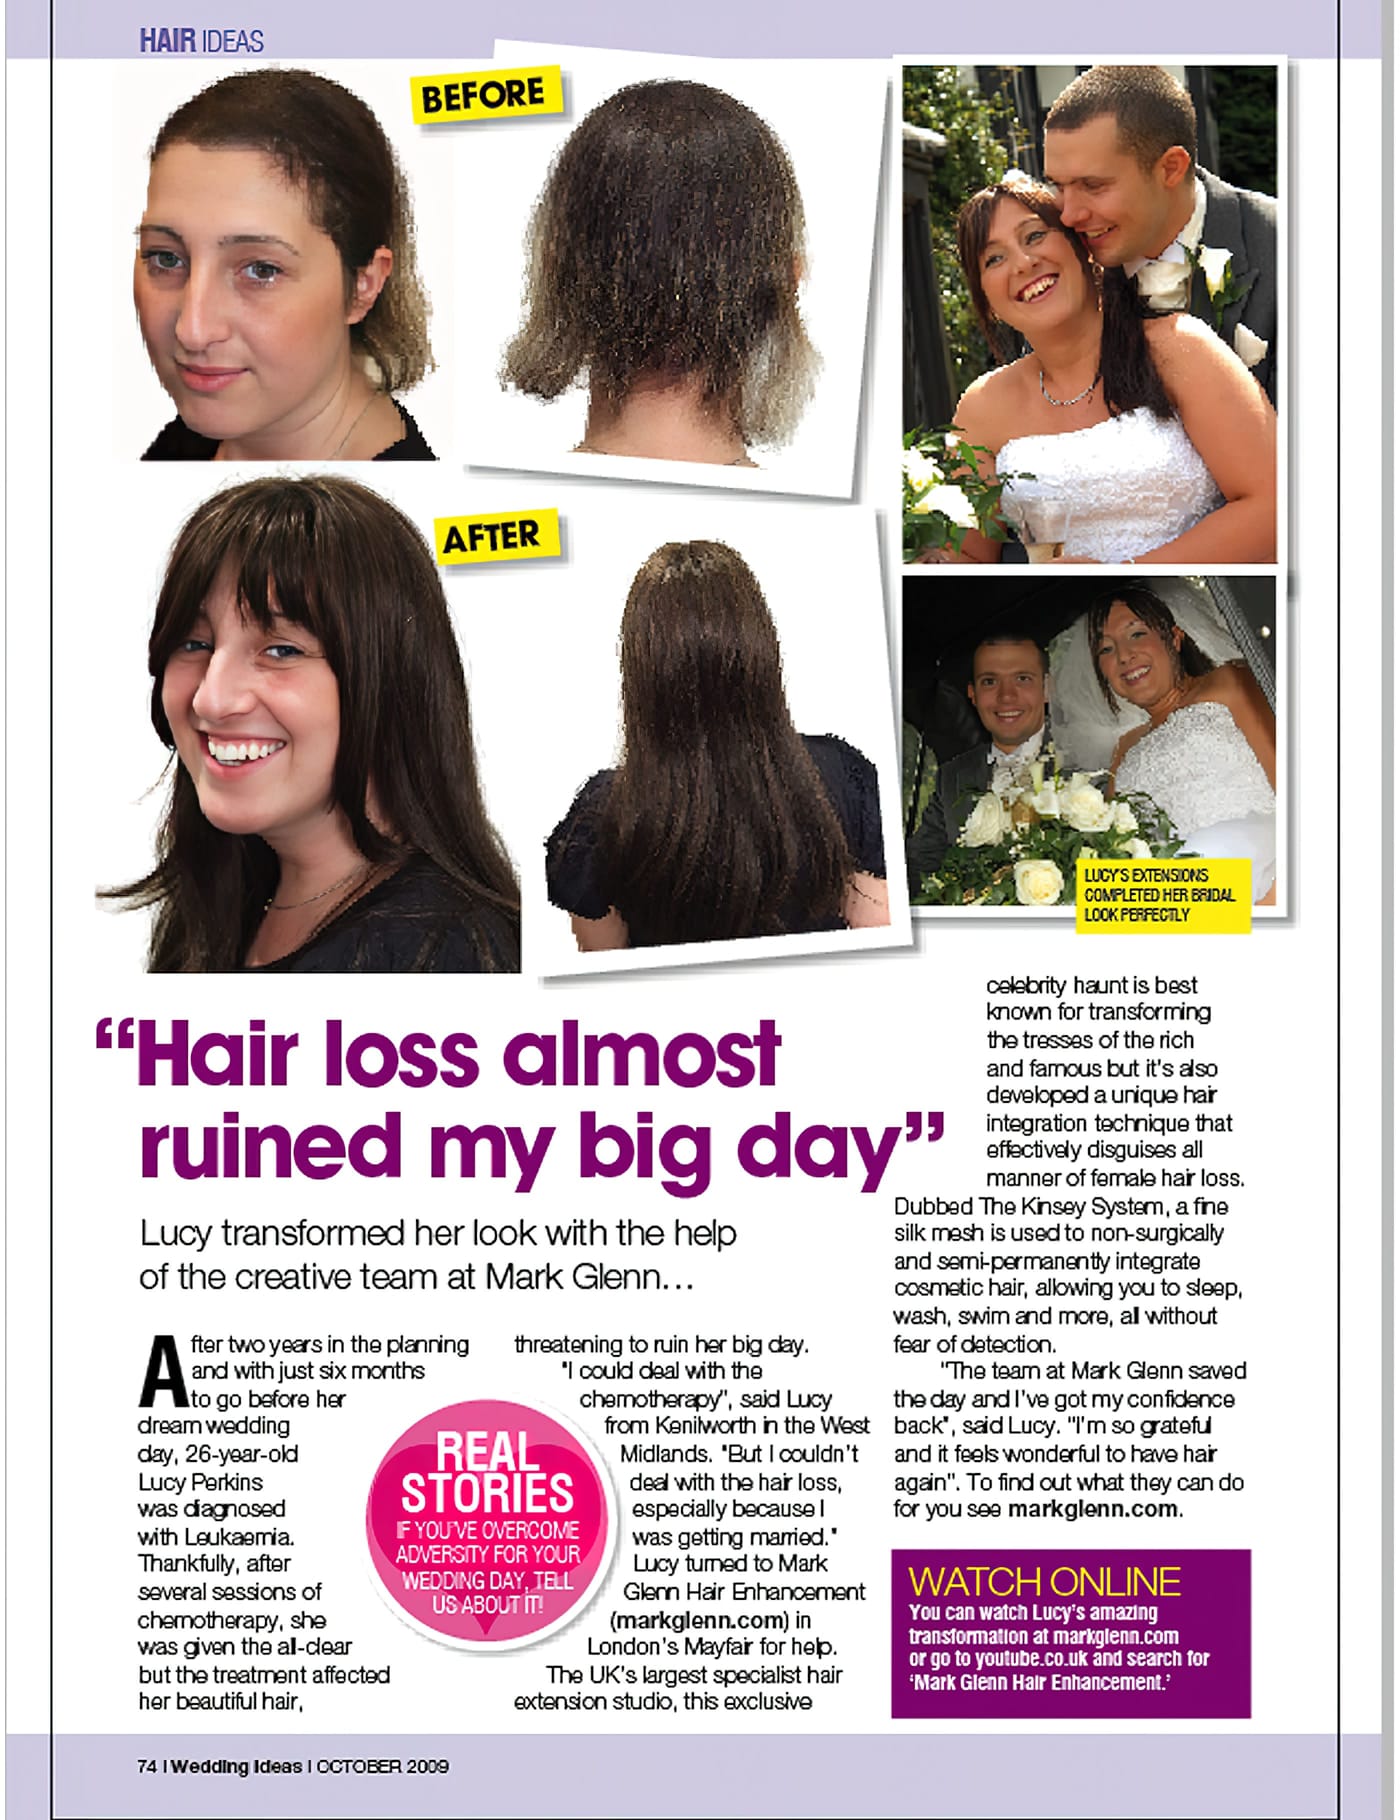 'Chemotherapy hair loss almost ruined my wedding - but Mark Glenn saved the day' - Wedding Ideas Magazine